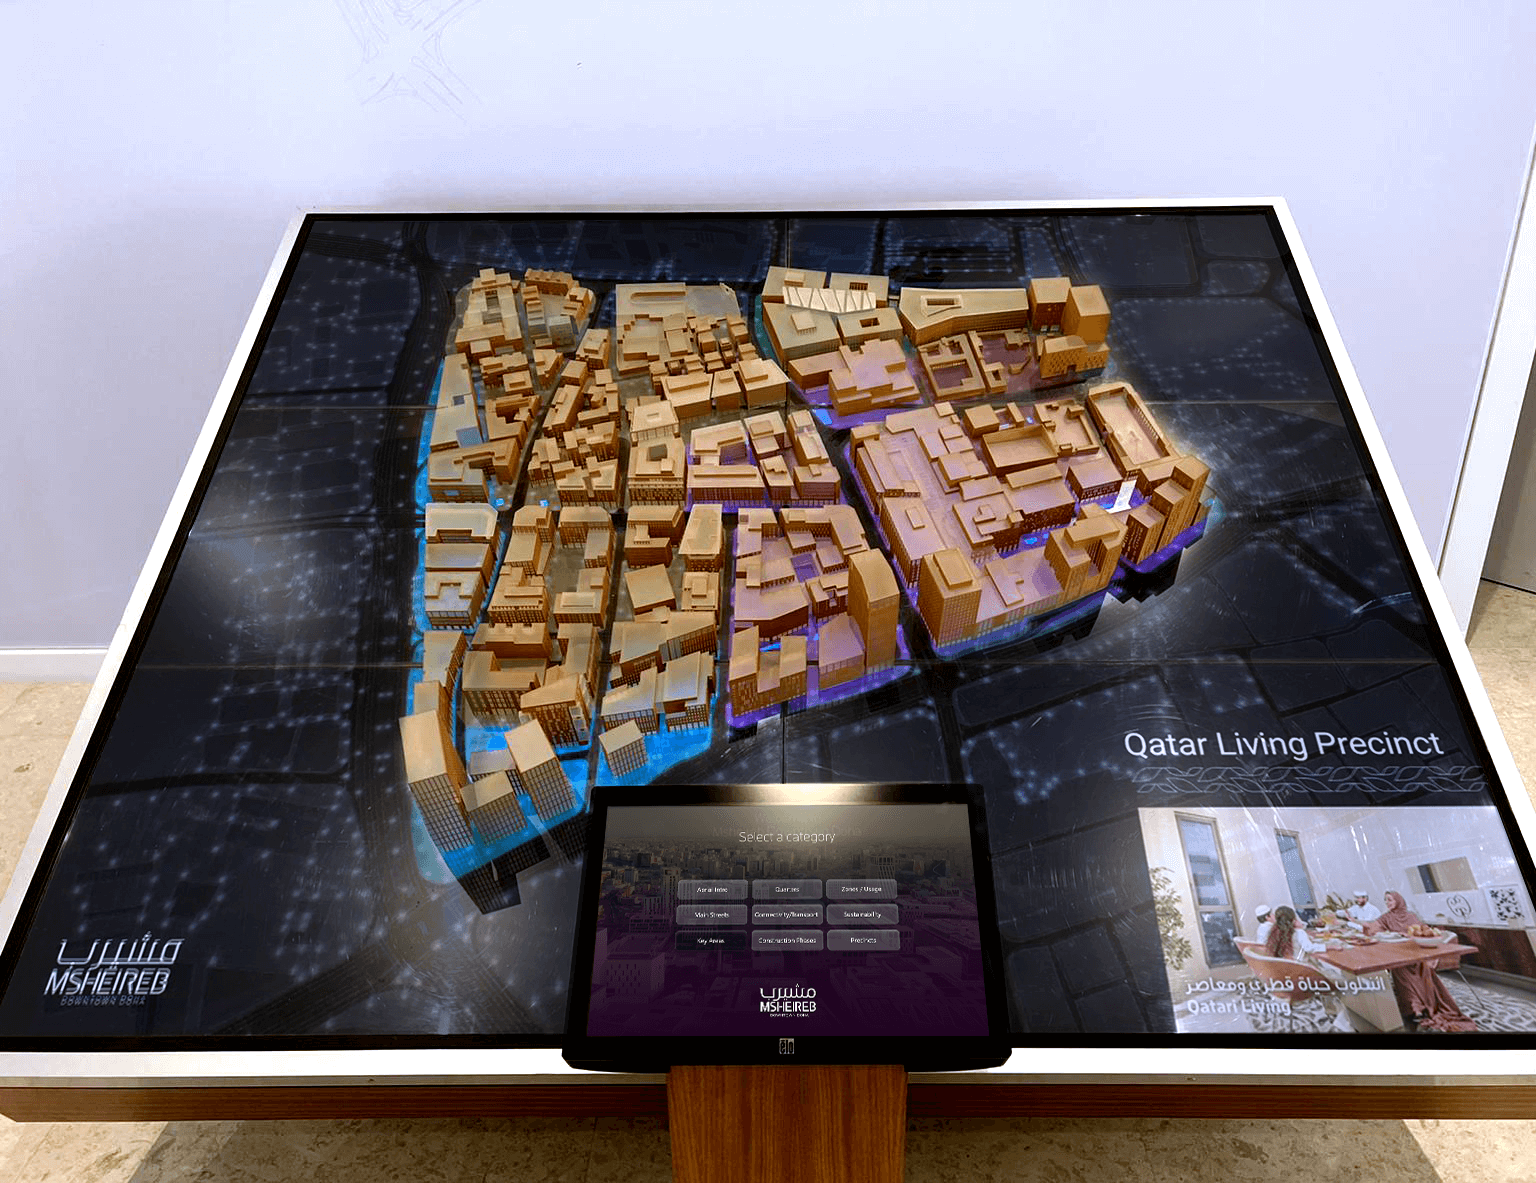 Msheireb Downtown Doha Interactive Model